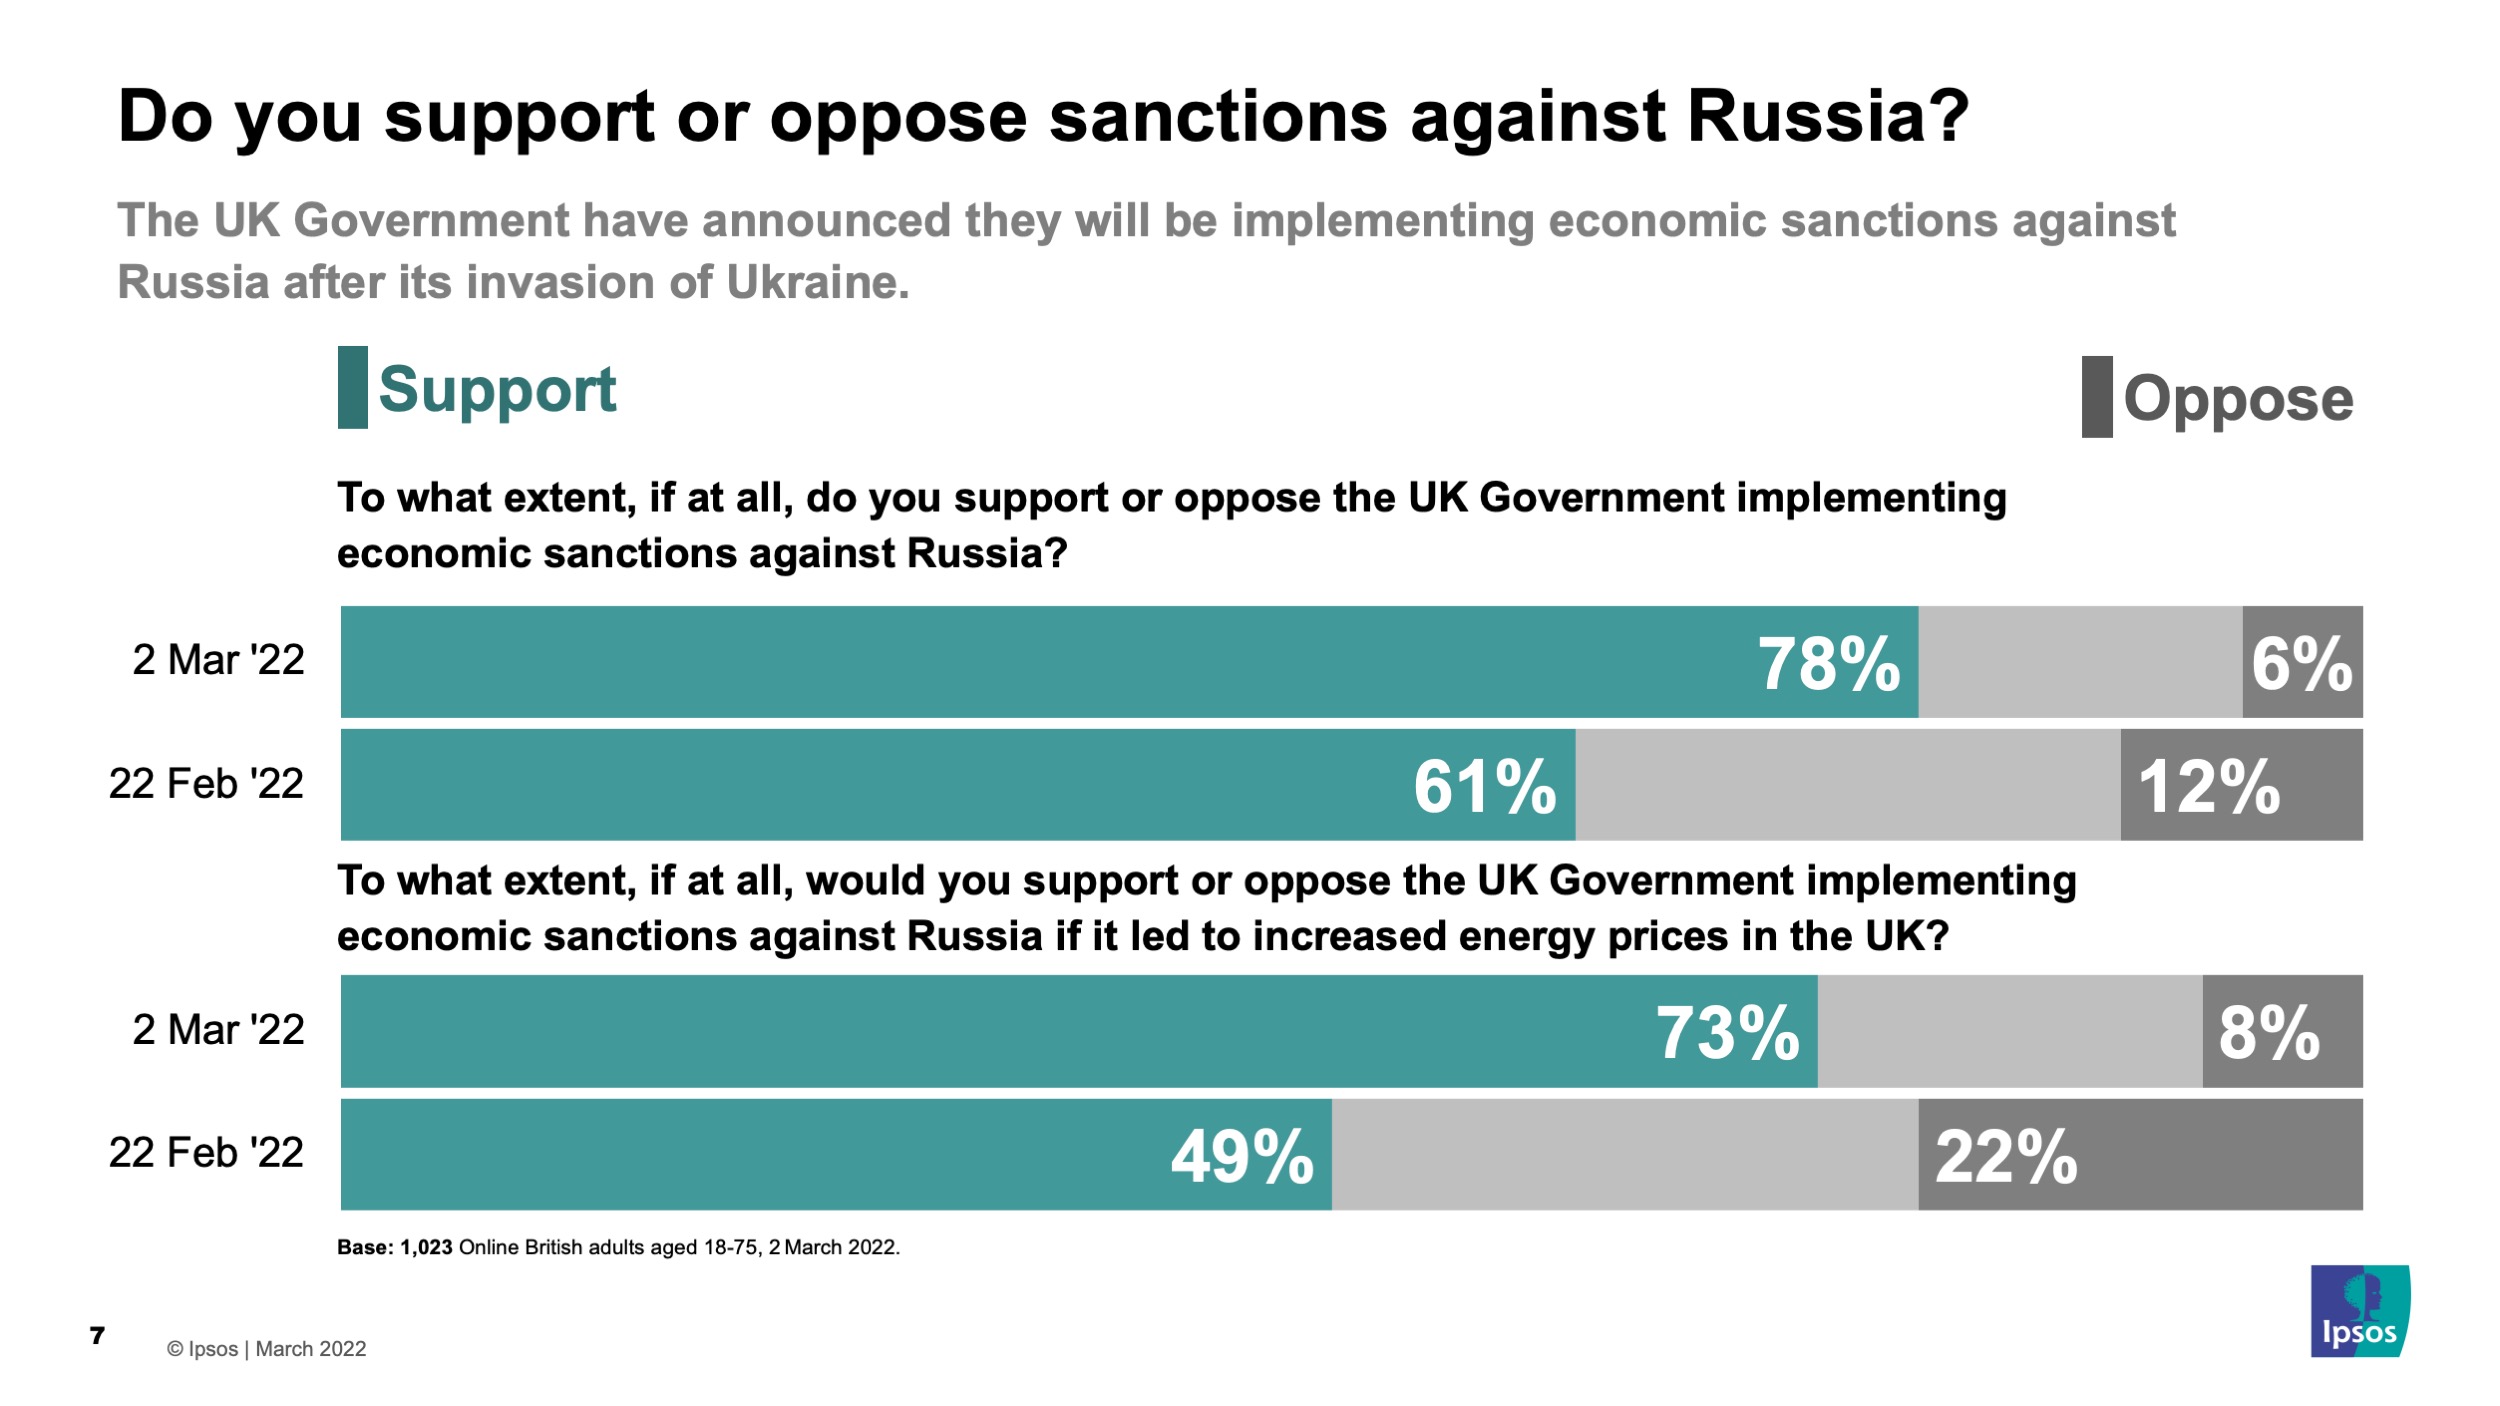 A chart showing support and opposition for sanctions against Russia over time